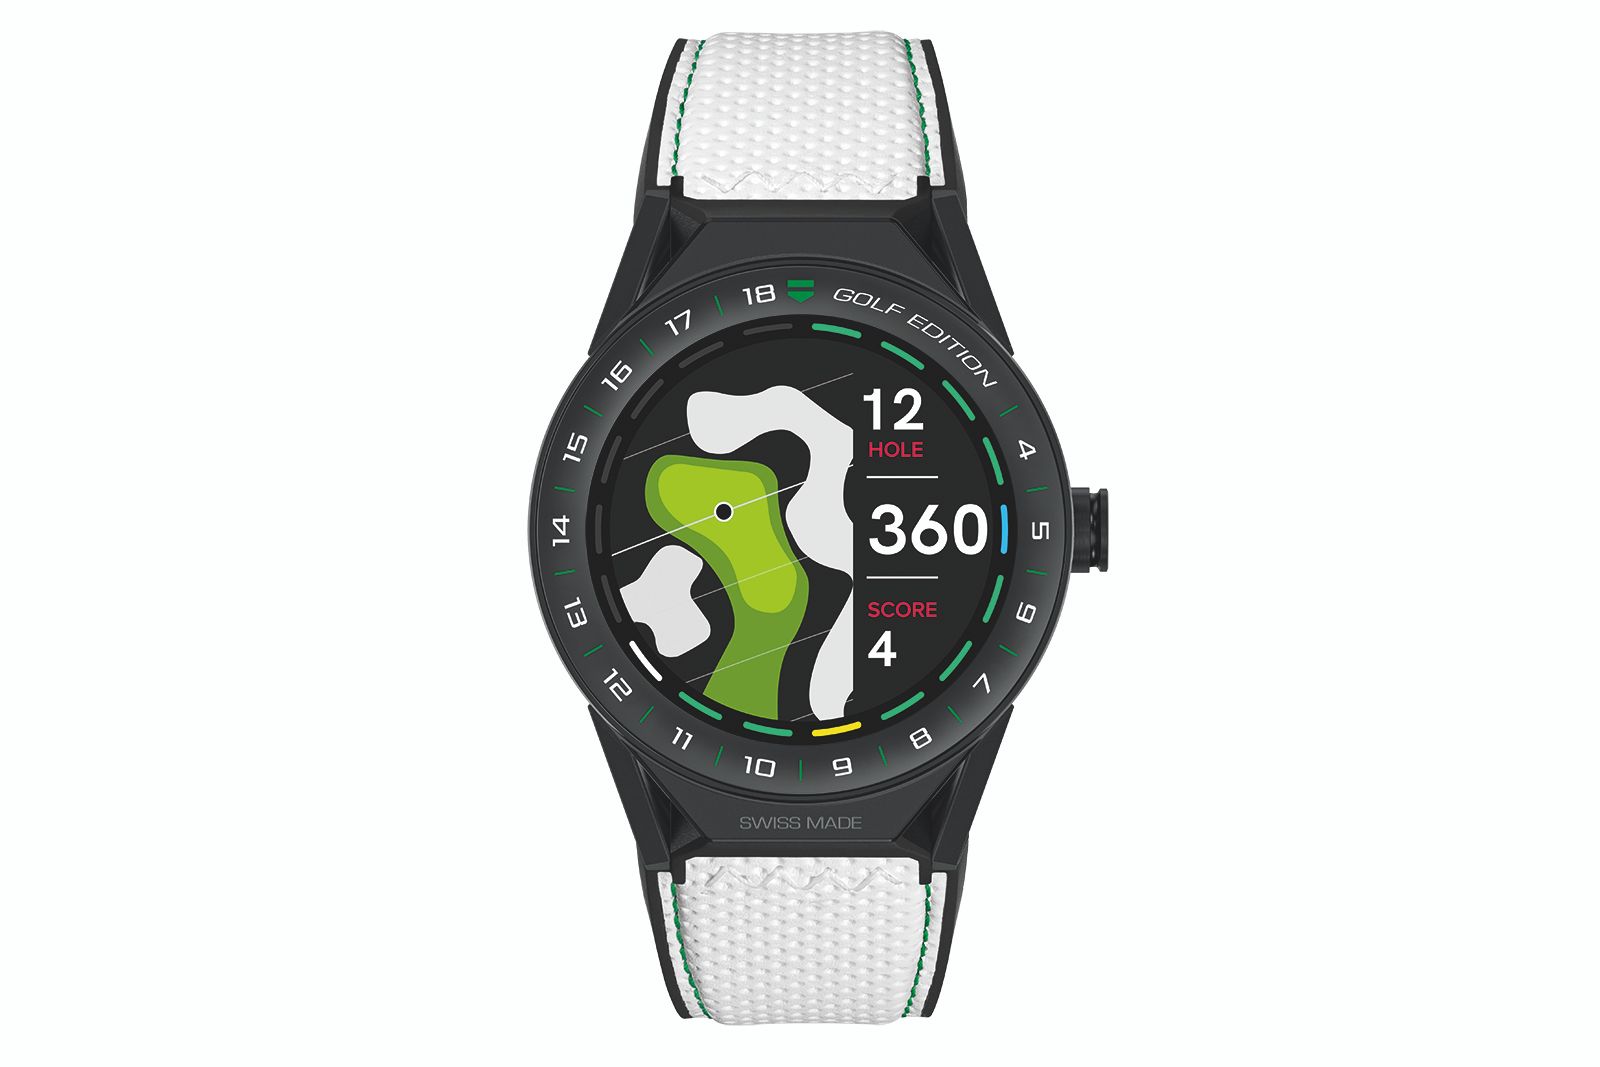 Tag Heuer Golf Edition smartwatch and app aim to improve your game image 2